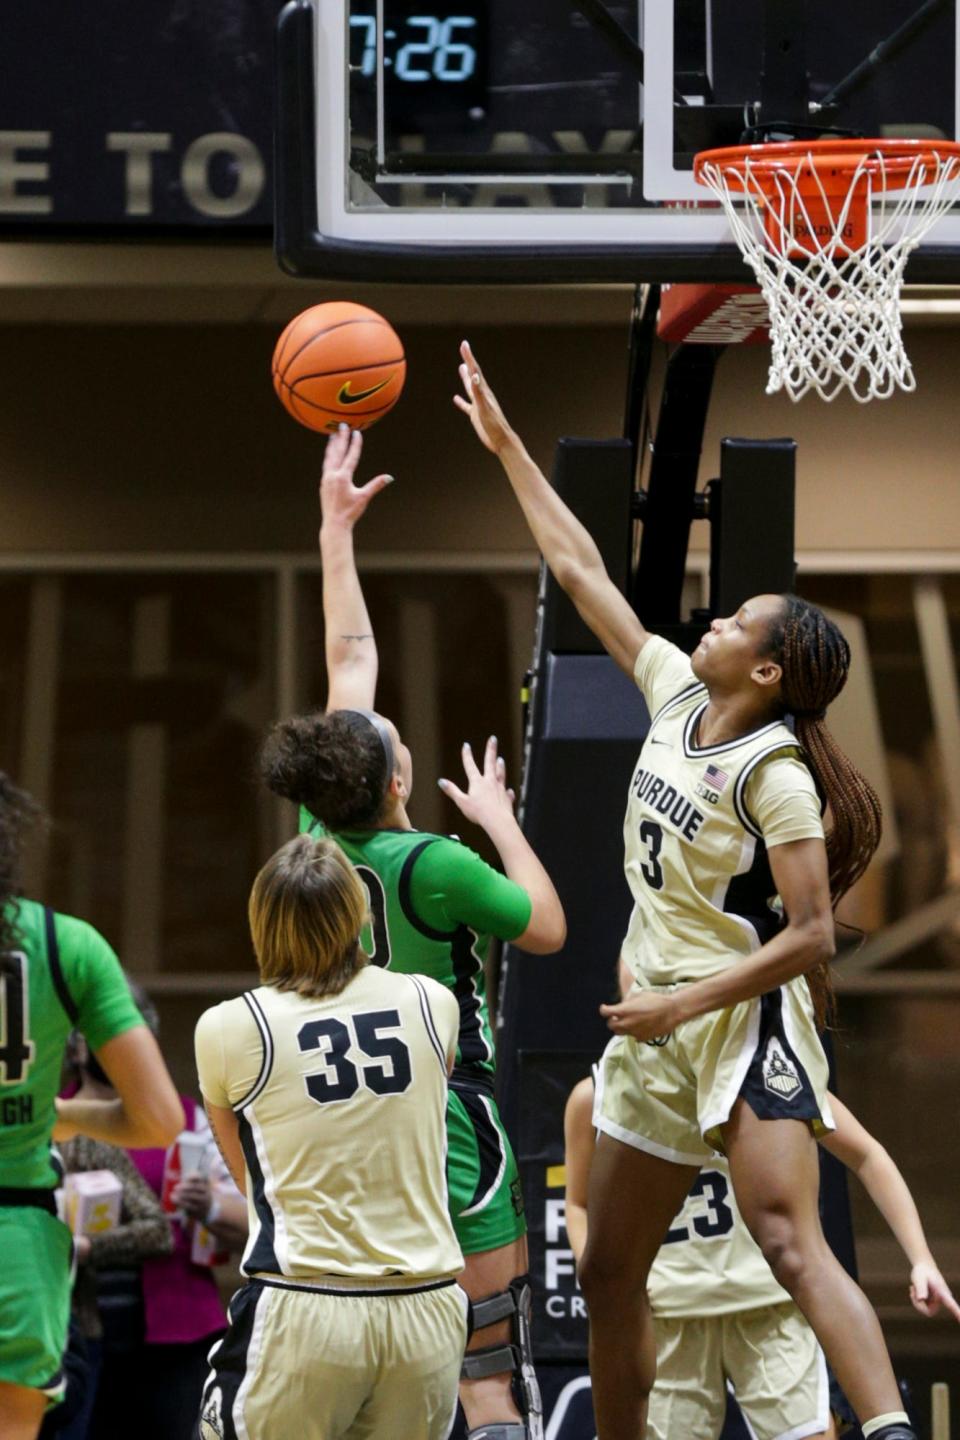 Purdue guard Jayla Smith (3) goes up to block against Marshall forward Aarionna Redman (30) during the second quarter of an NCAA women's basketball game, Monday, Nov. 22, 2021 at Mackey Arena in West Lafayette.